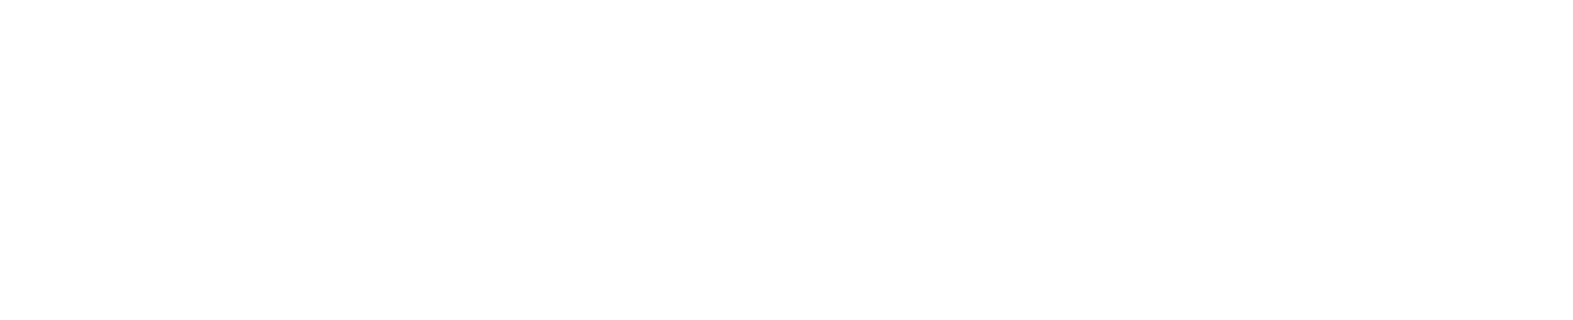 Pan American Silver
 logo large for dark backgrounds (transparent PNG)